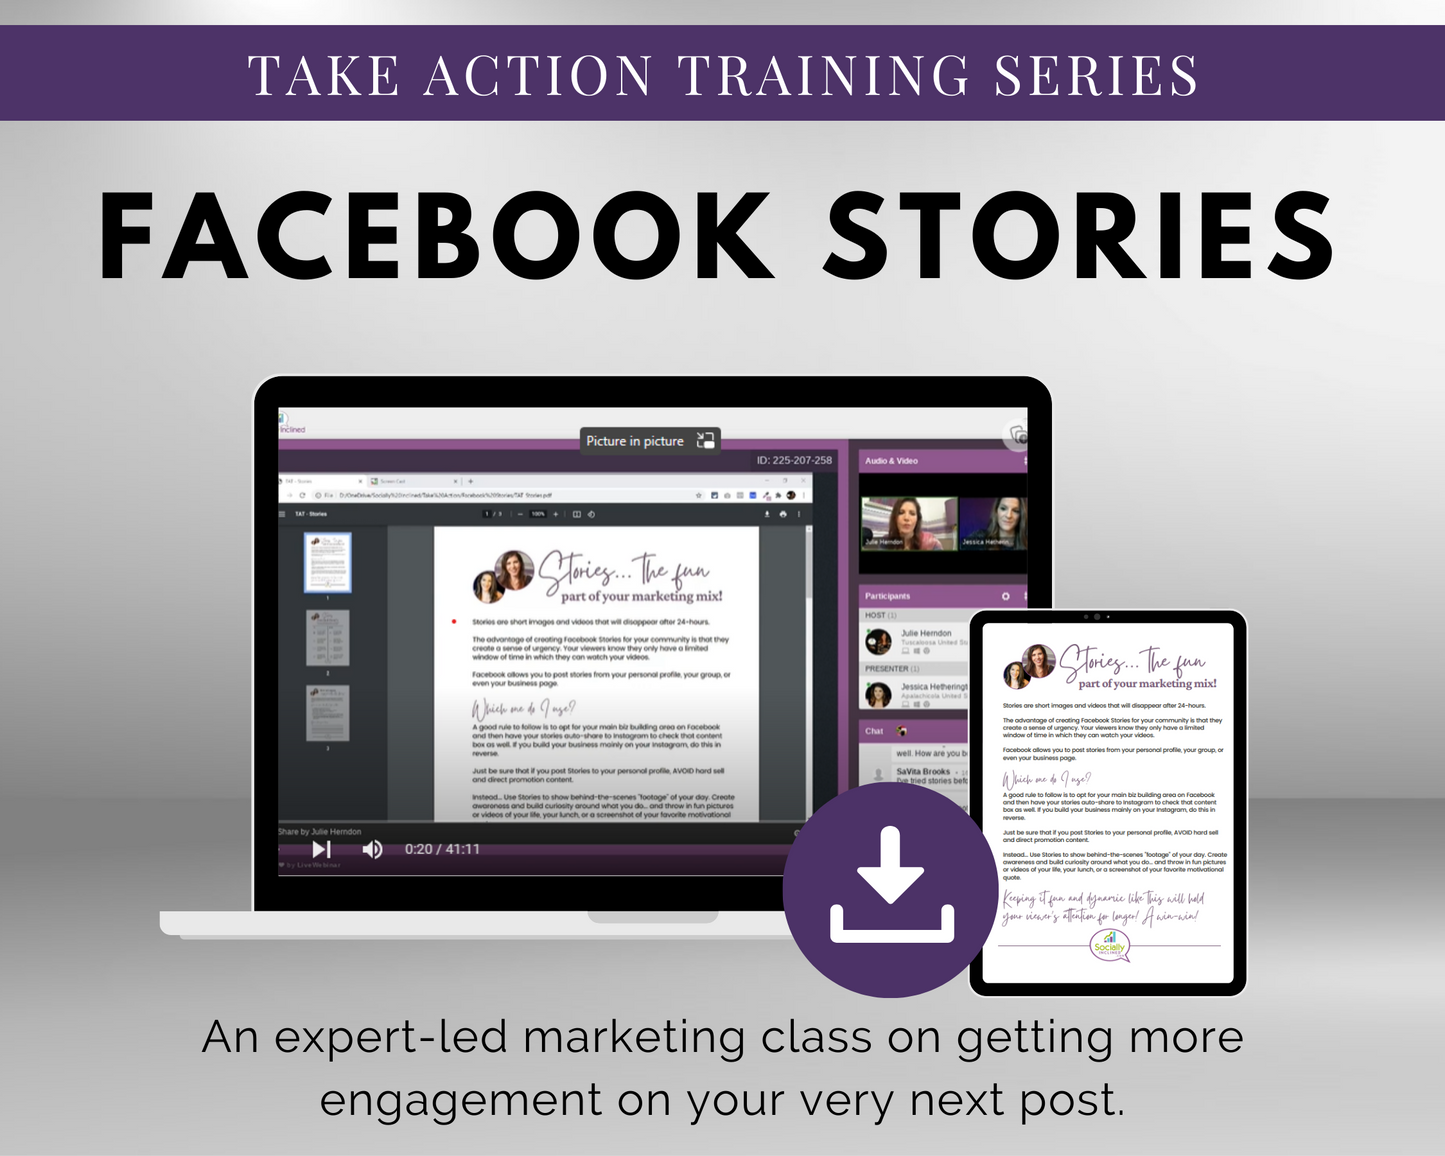 Introducing our new TAT - Facebook Stories Masterclass from Get Socially Inclined! Join us on Facebook for inspiring stories and actionable tips to help you reach.